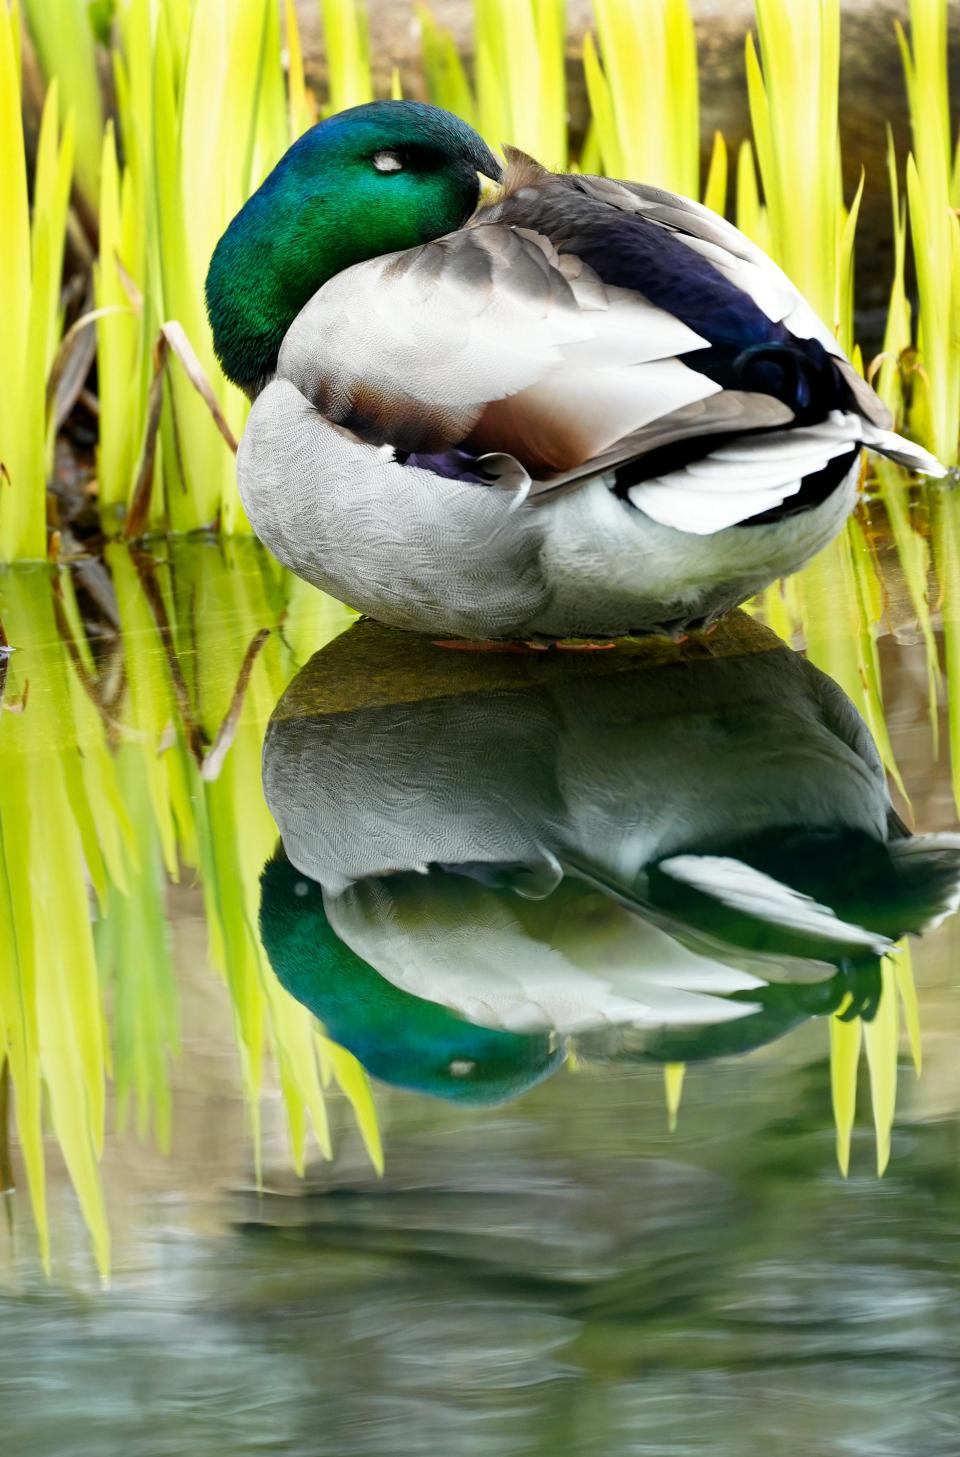 A mallard takes a nap in the pond at the overlook in Eden Park in East Walnut Hills, Tuesday, April 4, 2023. The male mallard is bright green to attract the females during breeding season. During the lifespan, which is 5-10 years, the female can lay as may as 130 eggs. You’re not going to outrun a mallard. Flocks have been estimated to travel at 55 mph. 